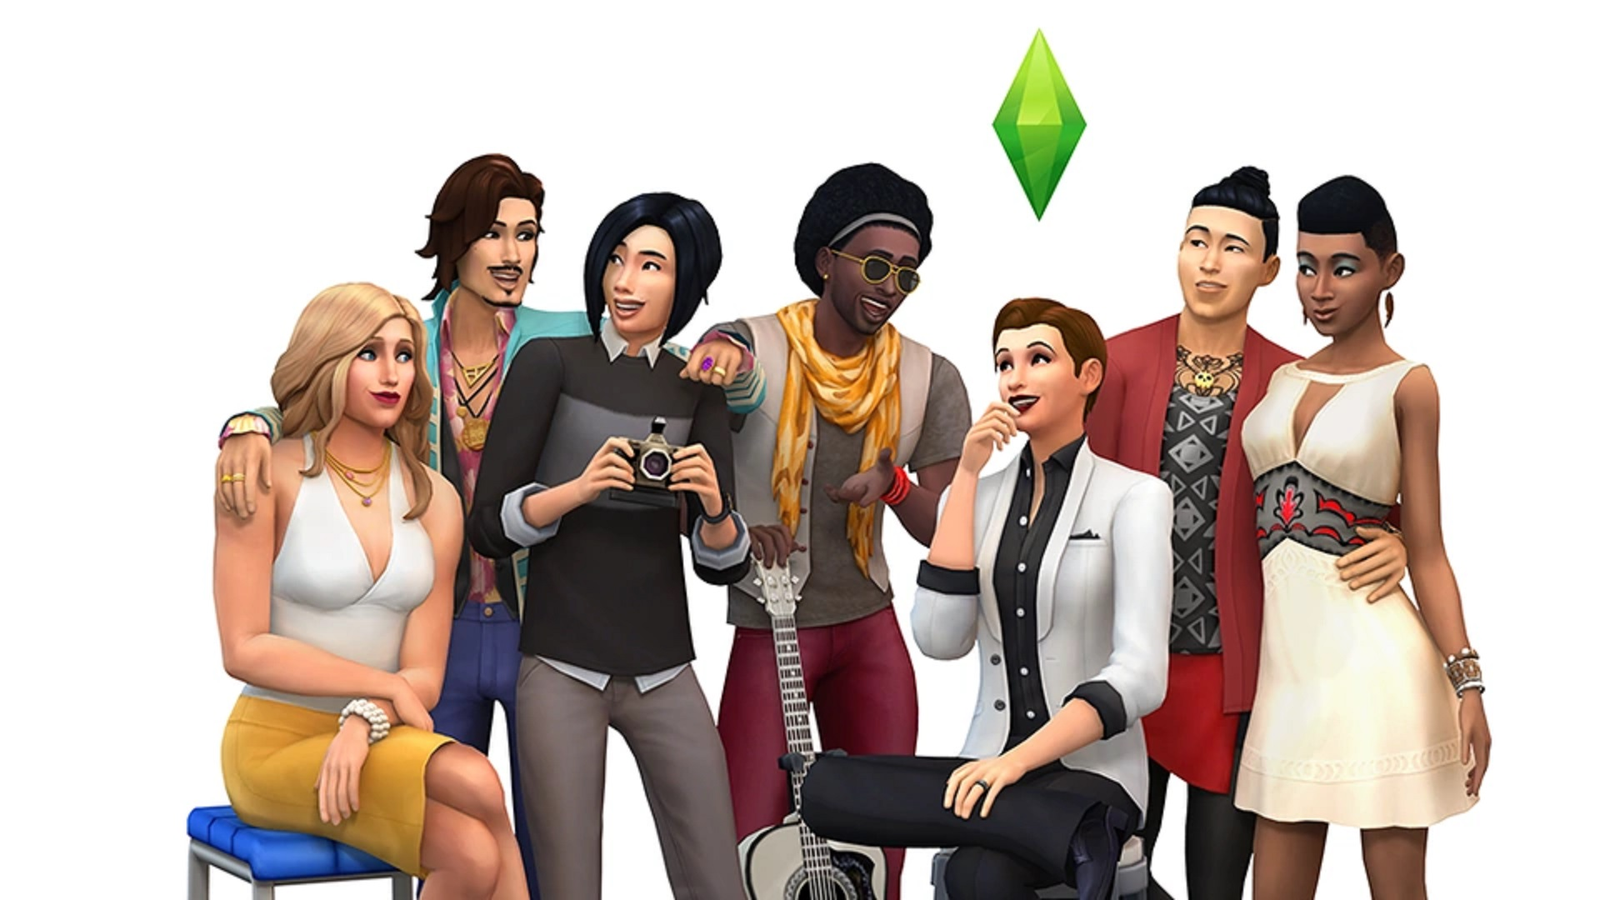 Mod The Sims - Age Up or Down by Age Group or Name